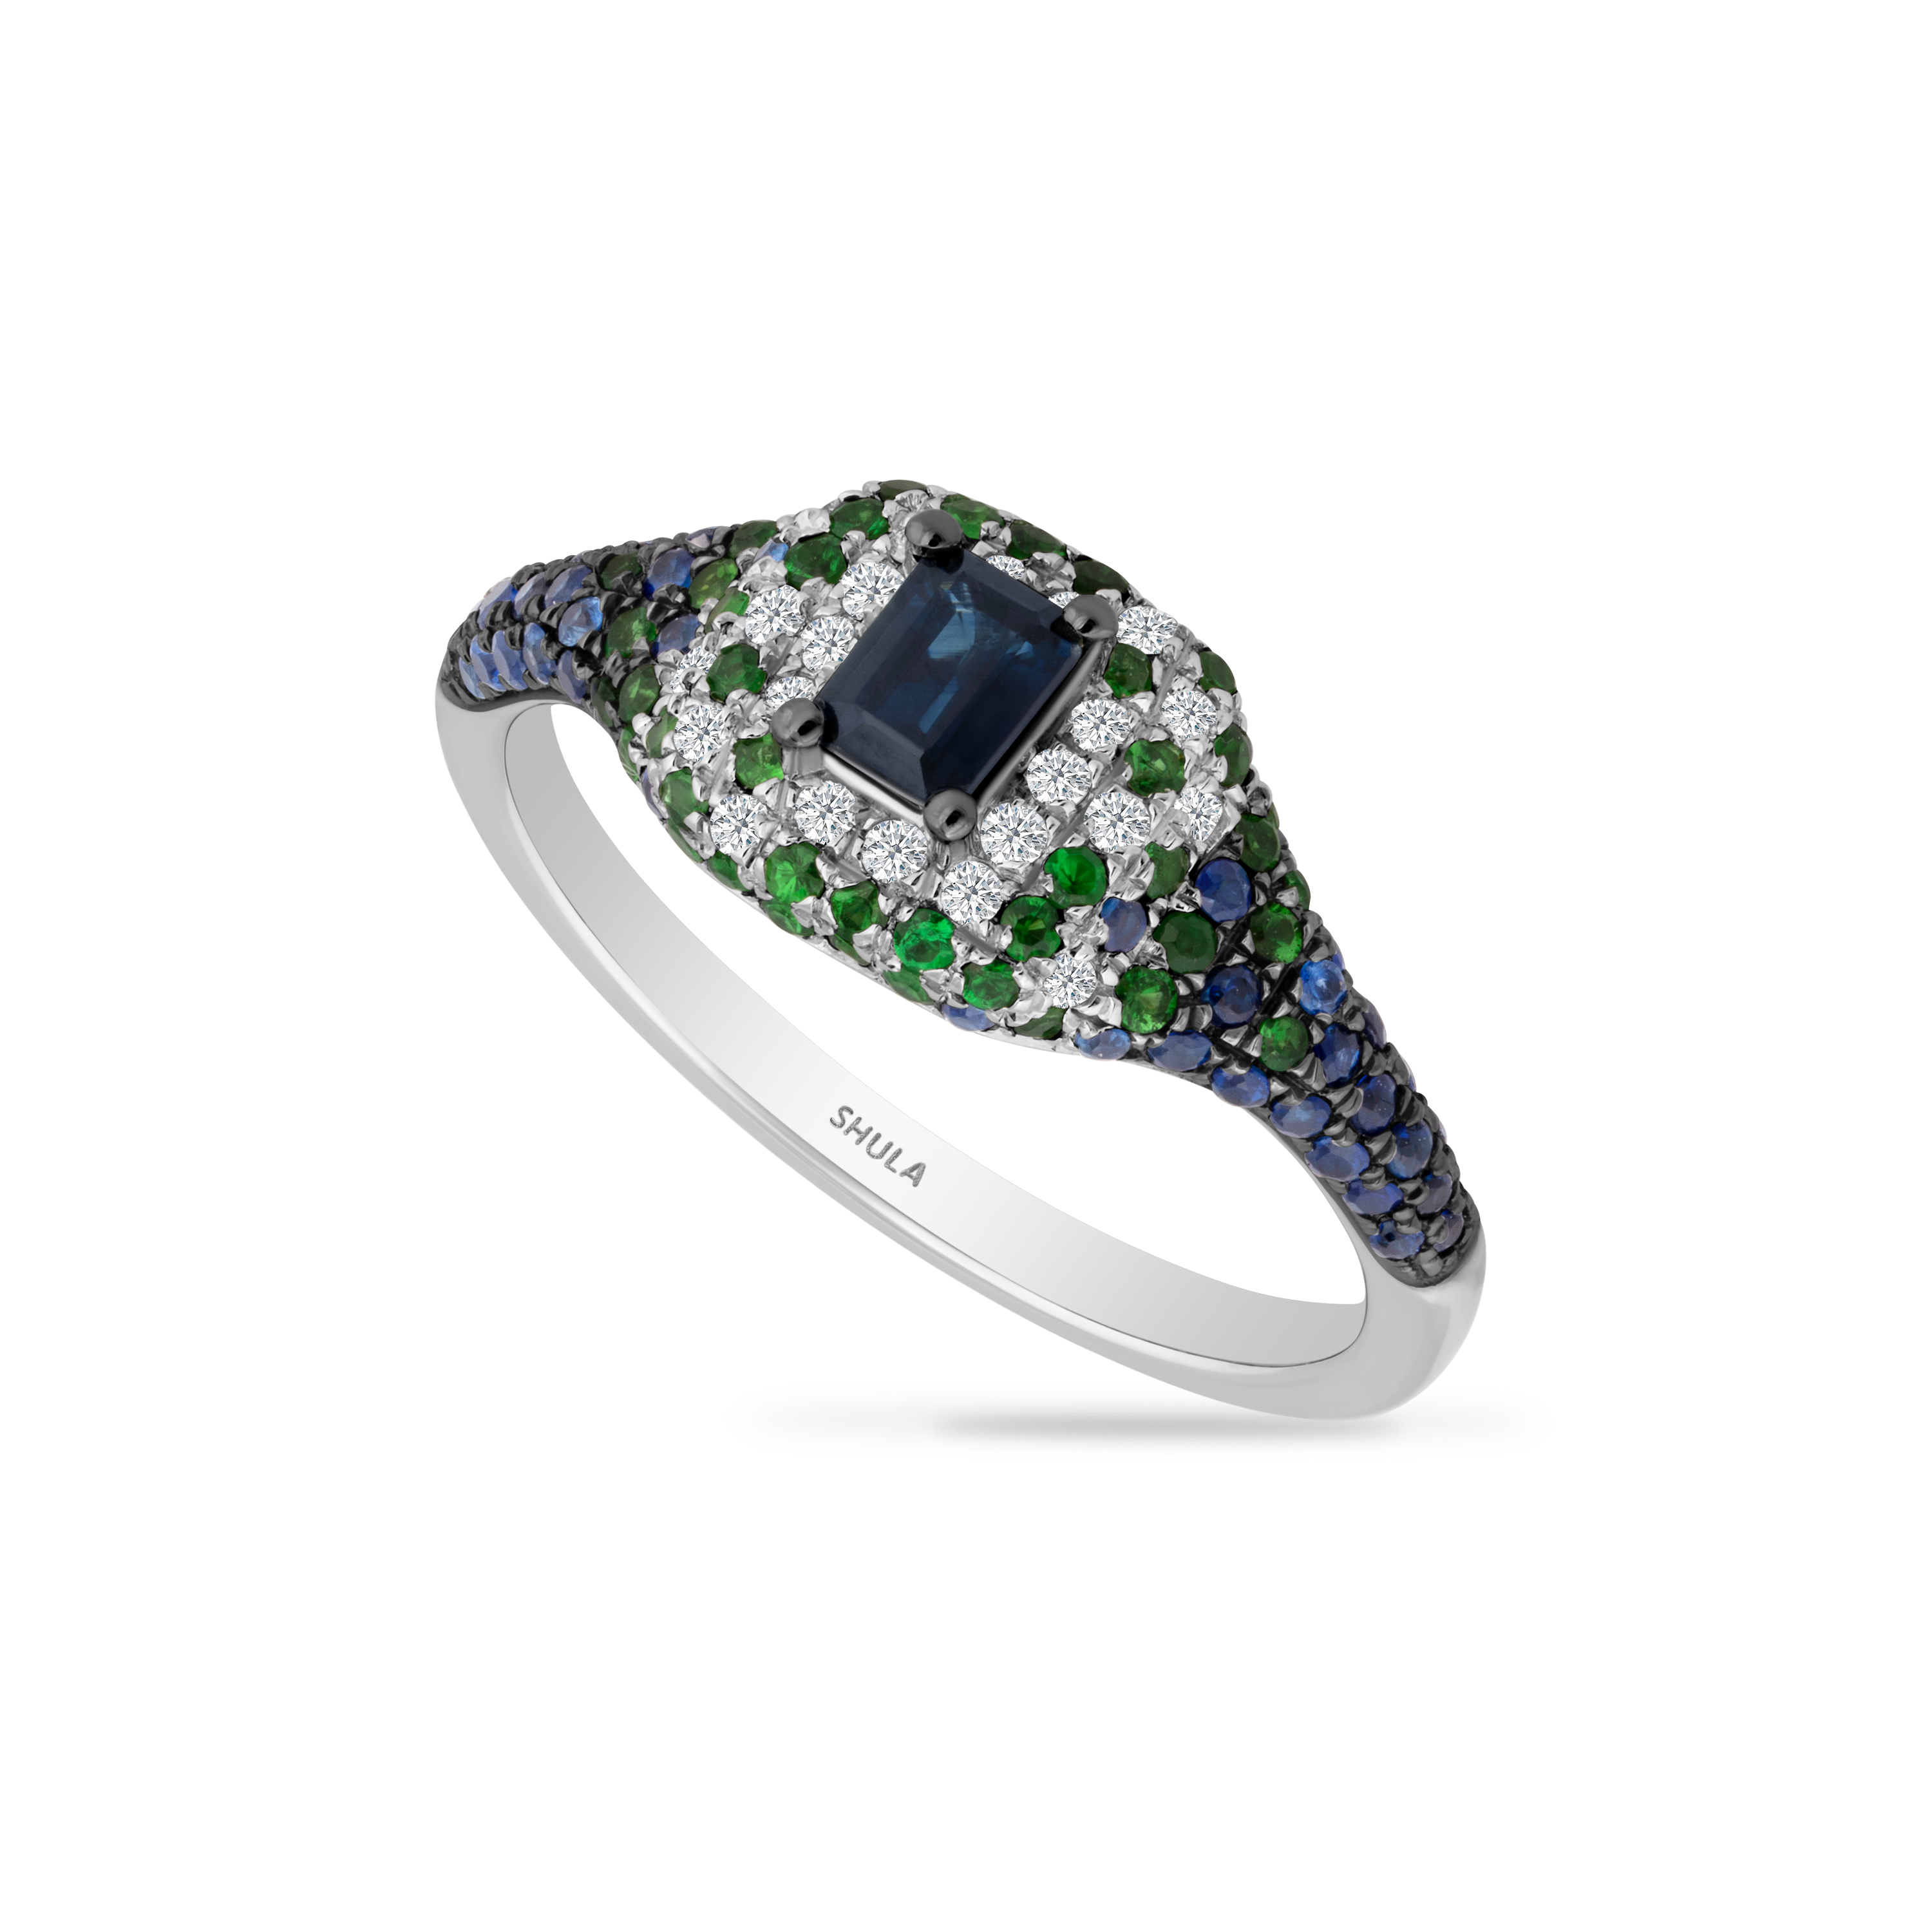 14K RING WITH 22 DIAMONDS 0.11CT, 46 ROUND SAPPHIRES 0.27CT, 1 SQUARE EMERALD 0.31CT AND 48 GREEN GARNETS 0.29CT